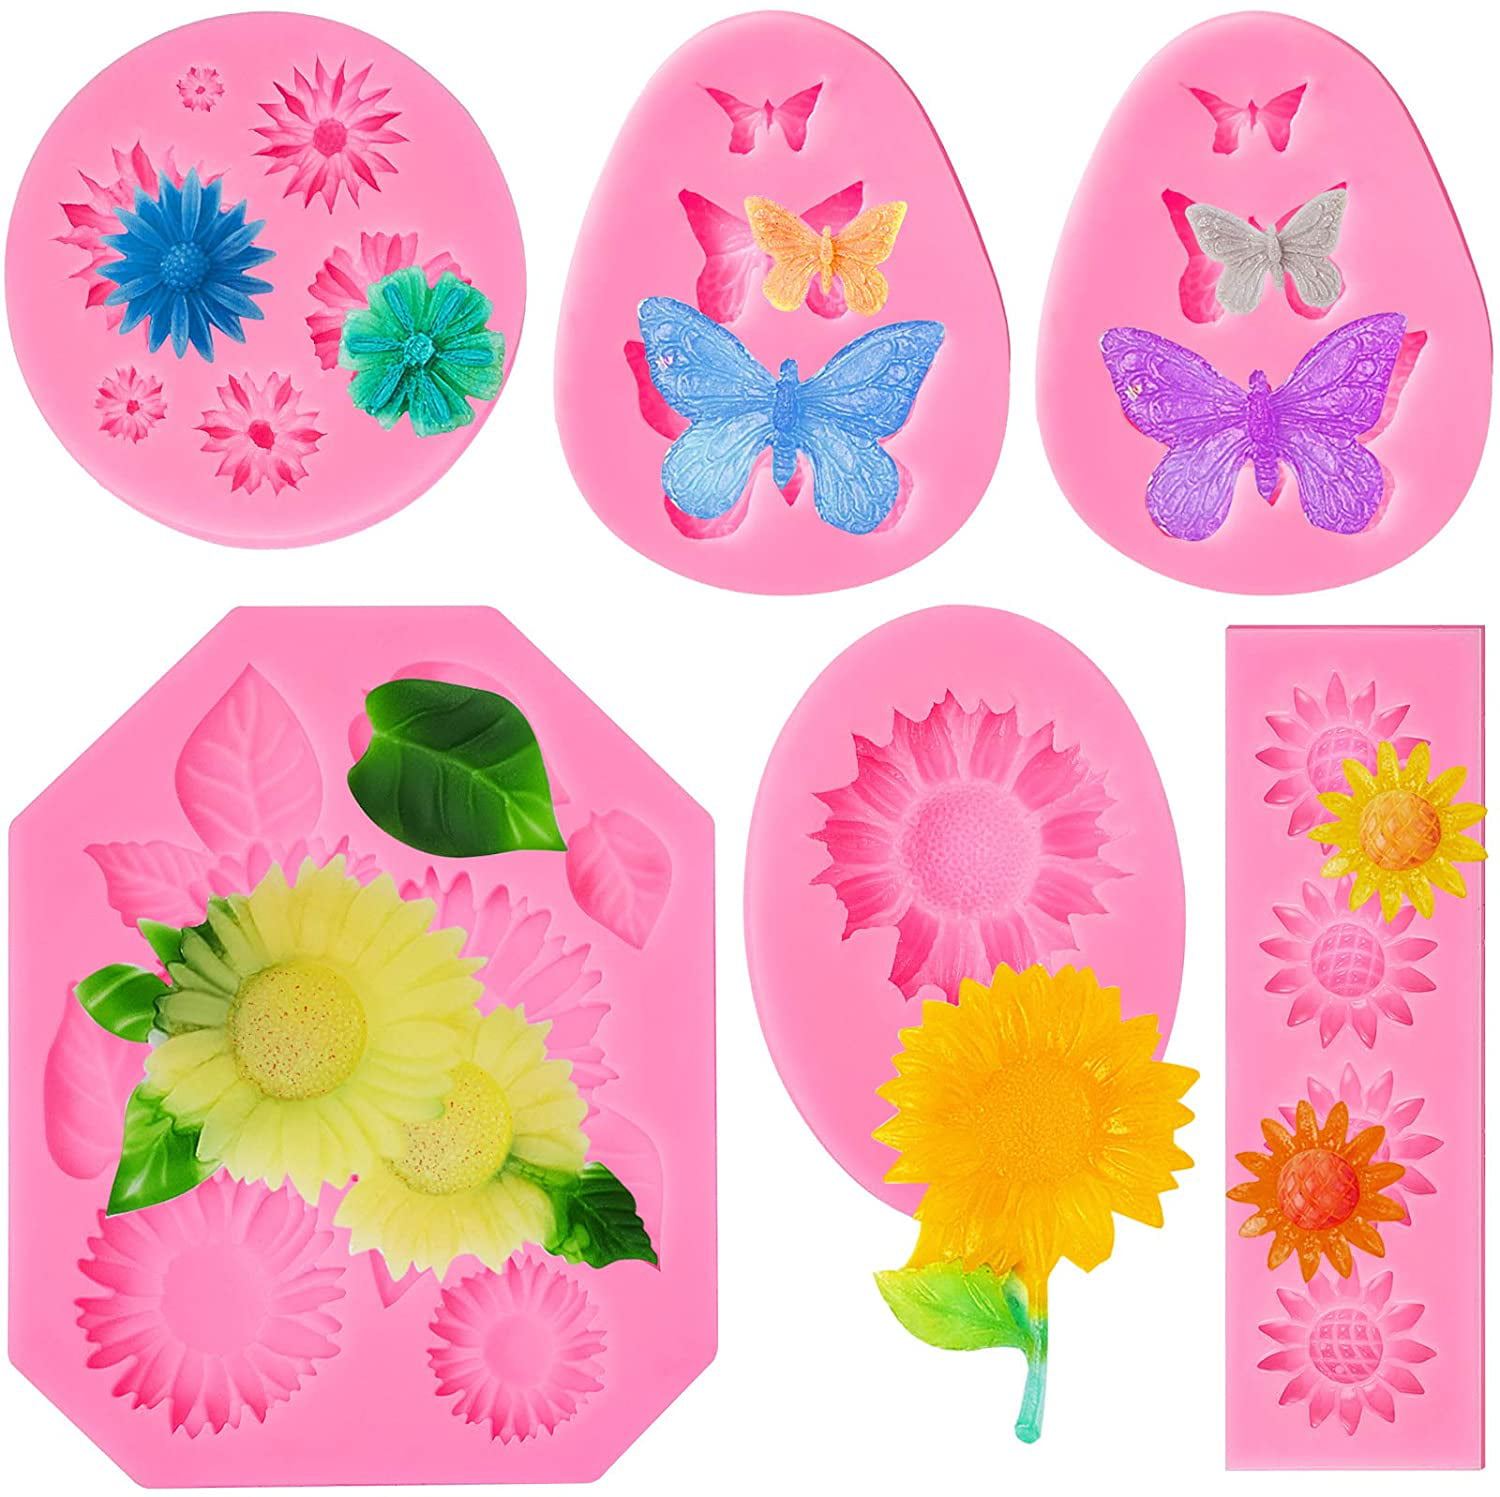 6 Pieces Butterfly Silicone Fondant Molds sunflower Clay Molds Decoration Tool for Kids Adult Fondant Candy and Homemade Cake Polymer Clay DIY 